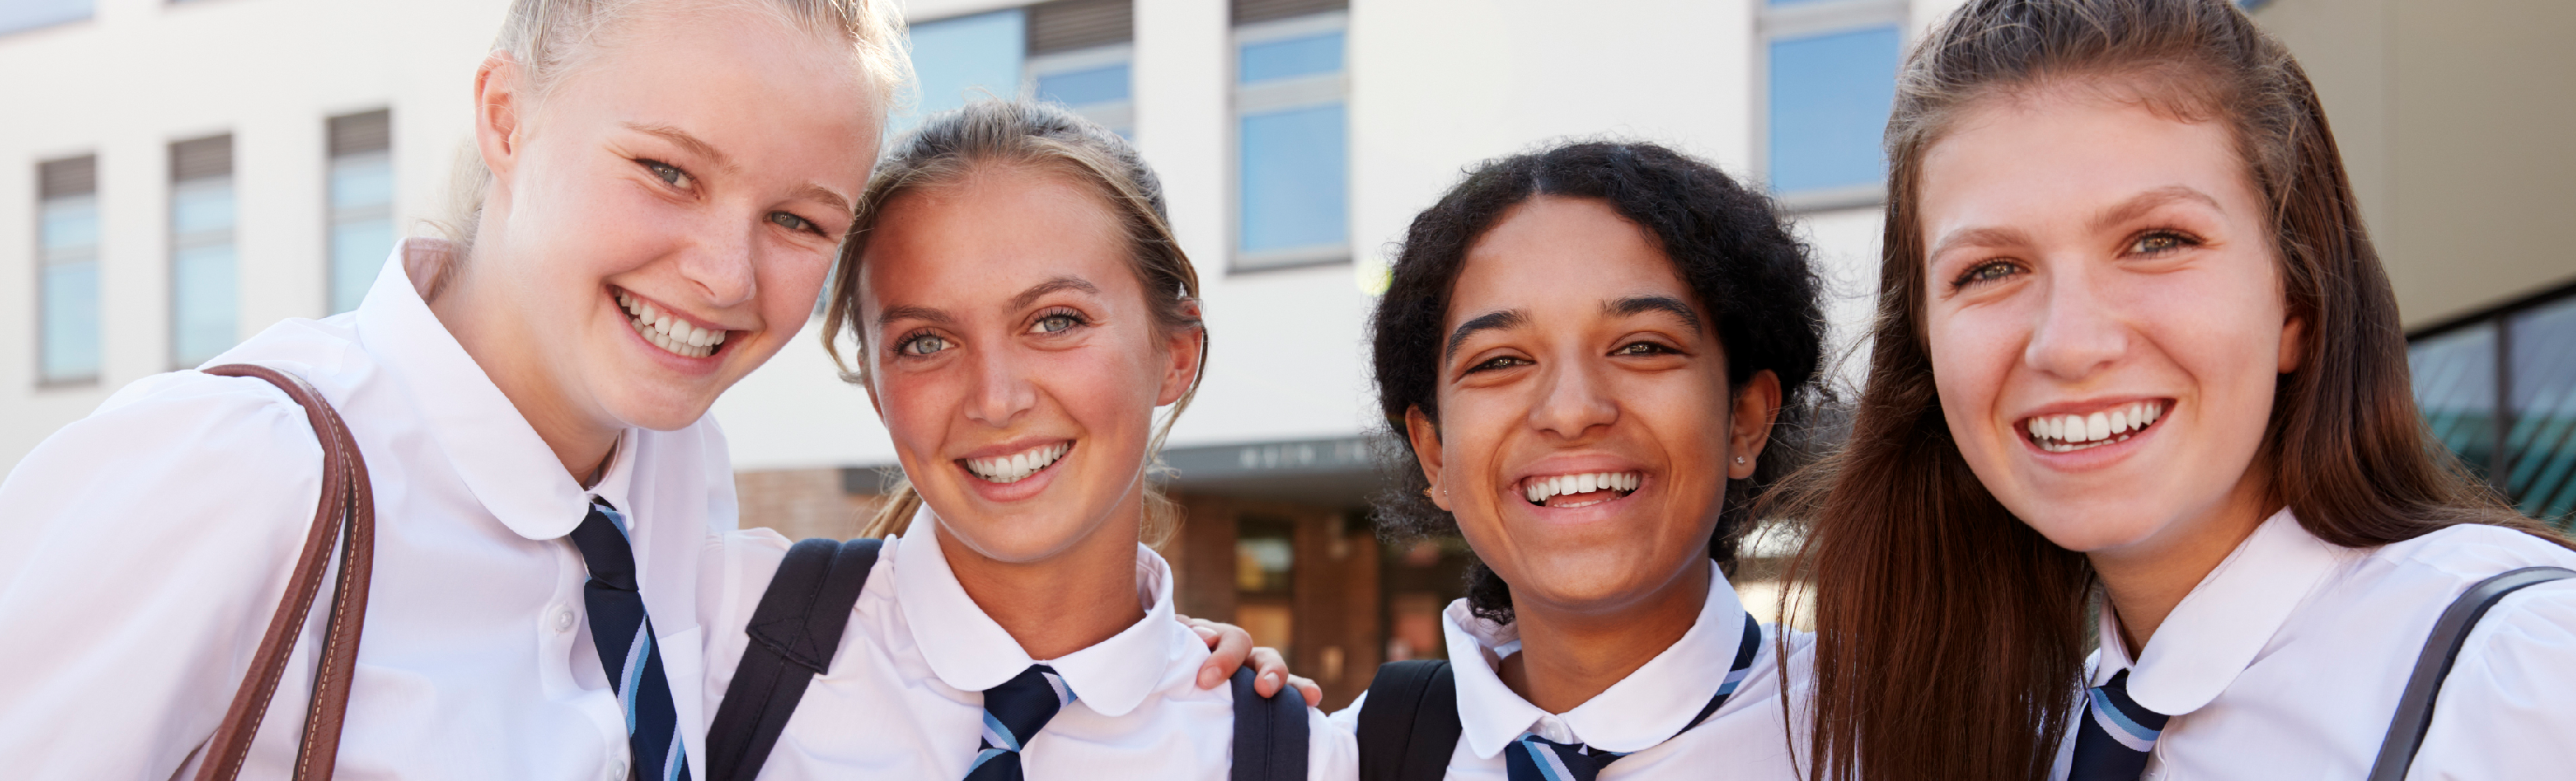 4 female students standing next to each other and smiling at the camera.